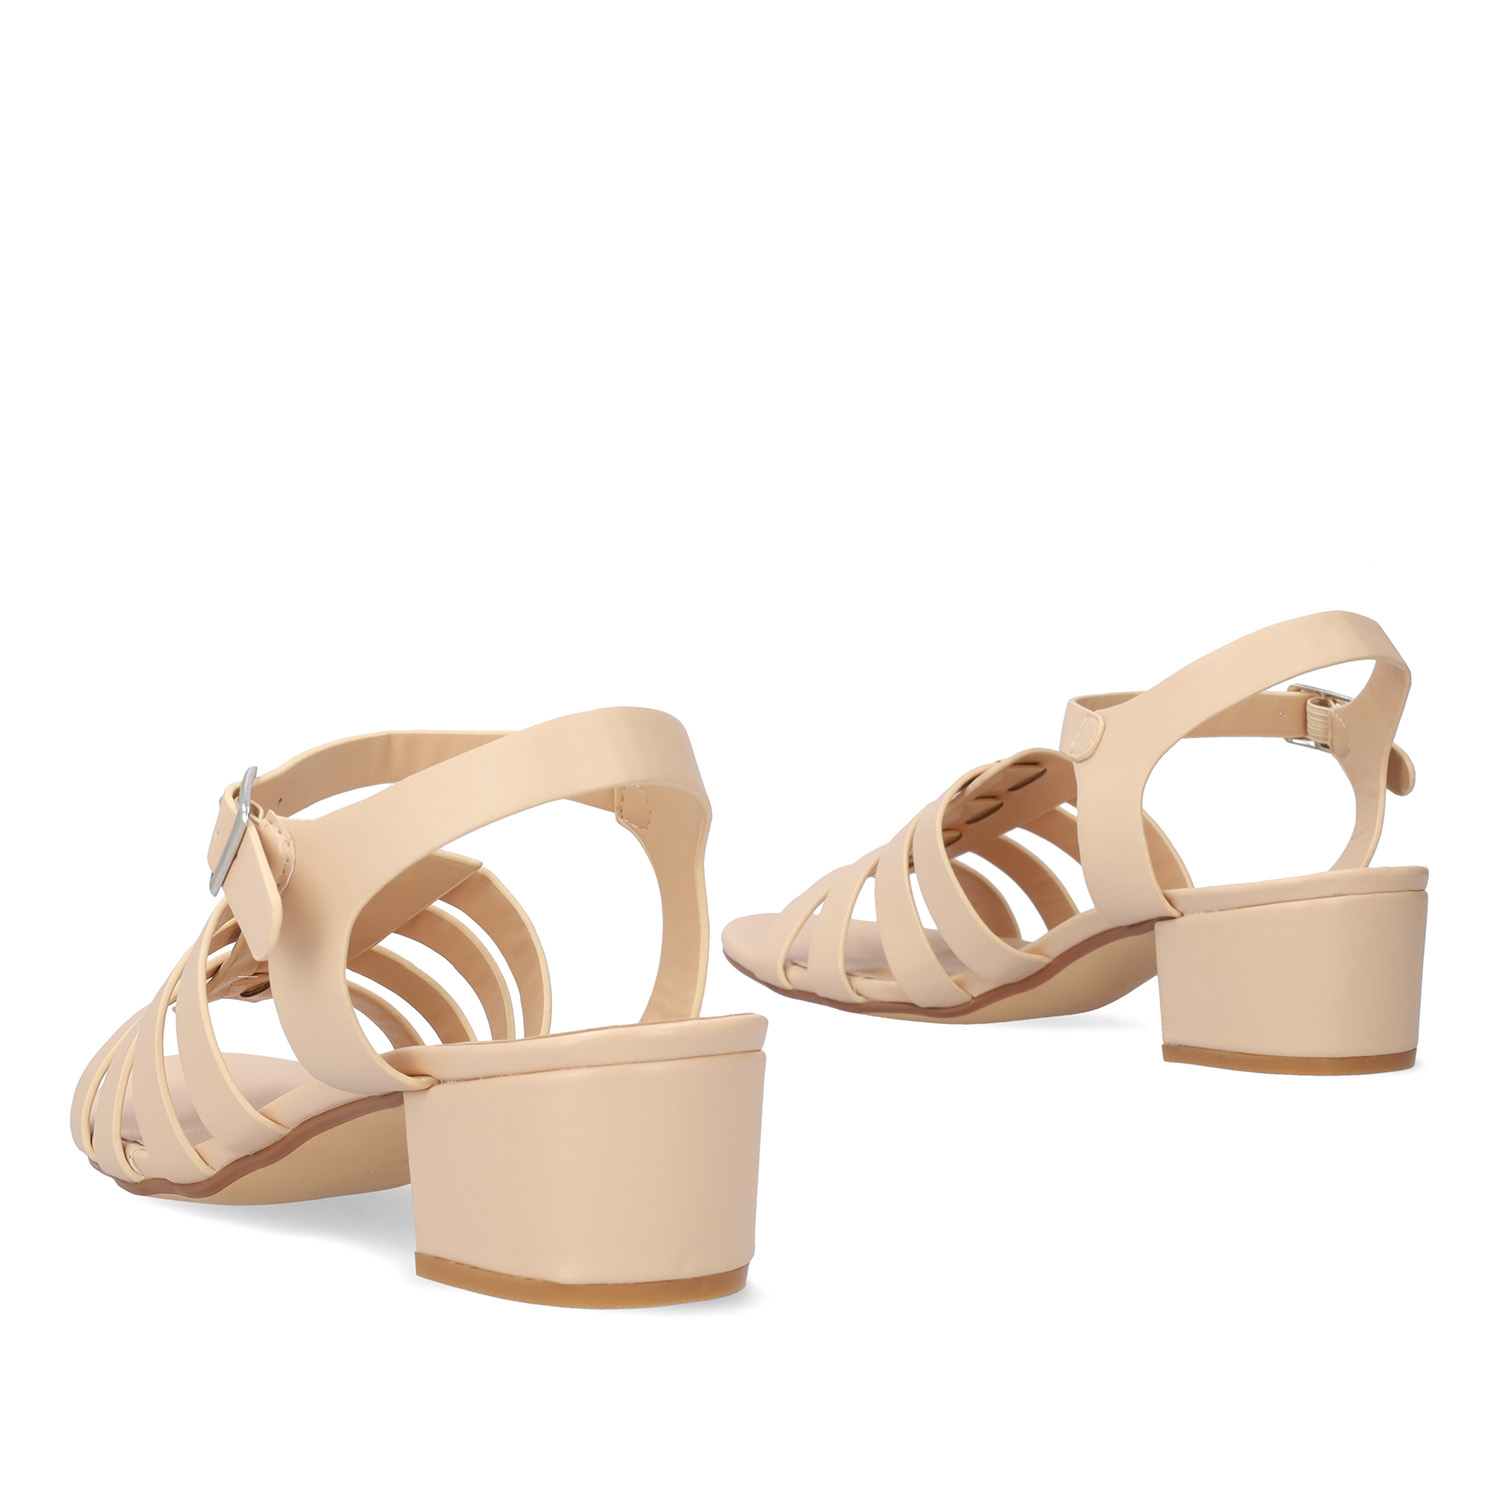 Squared heel sandal in nude soft material 